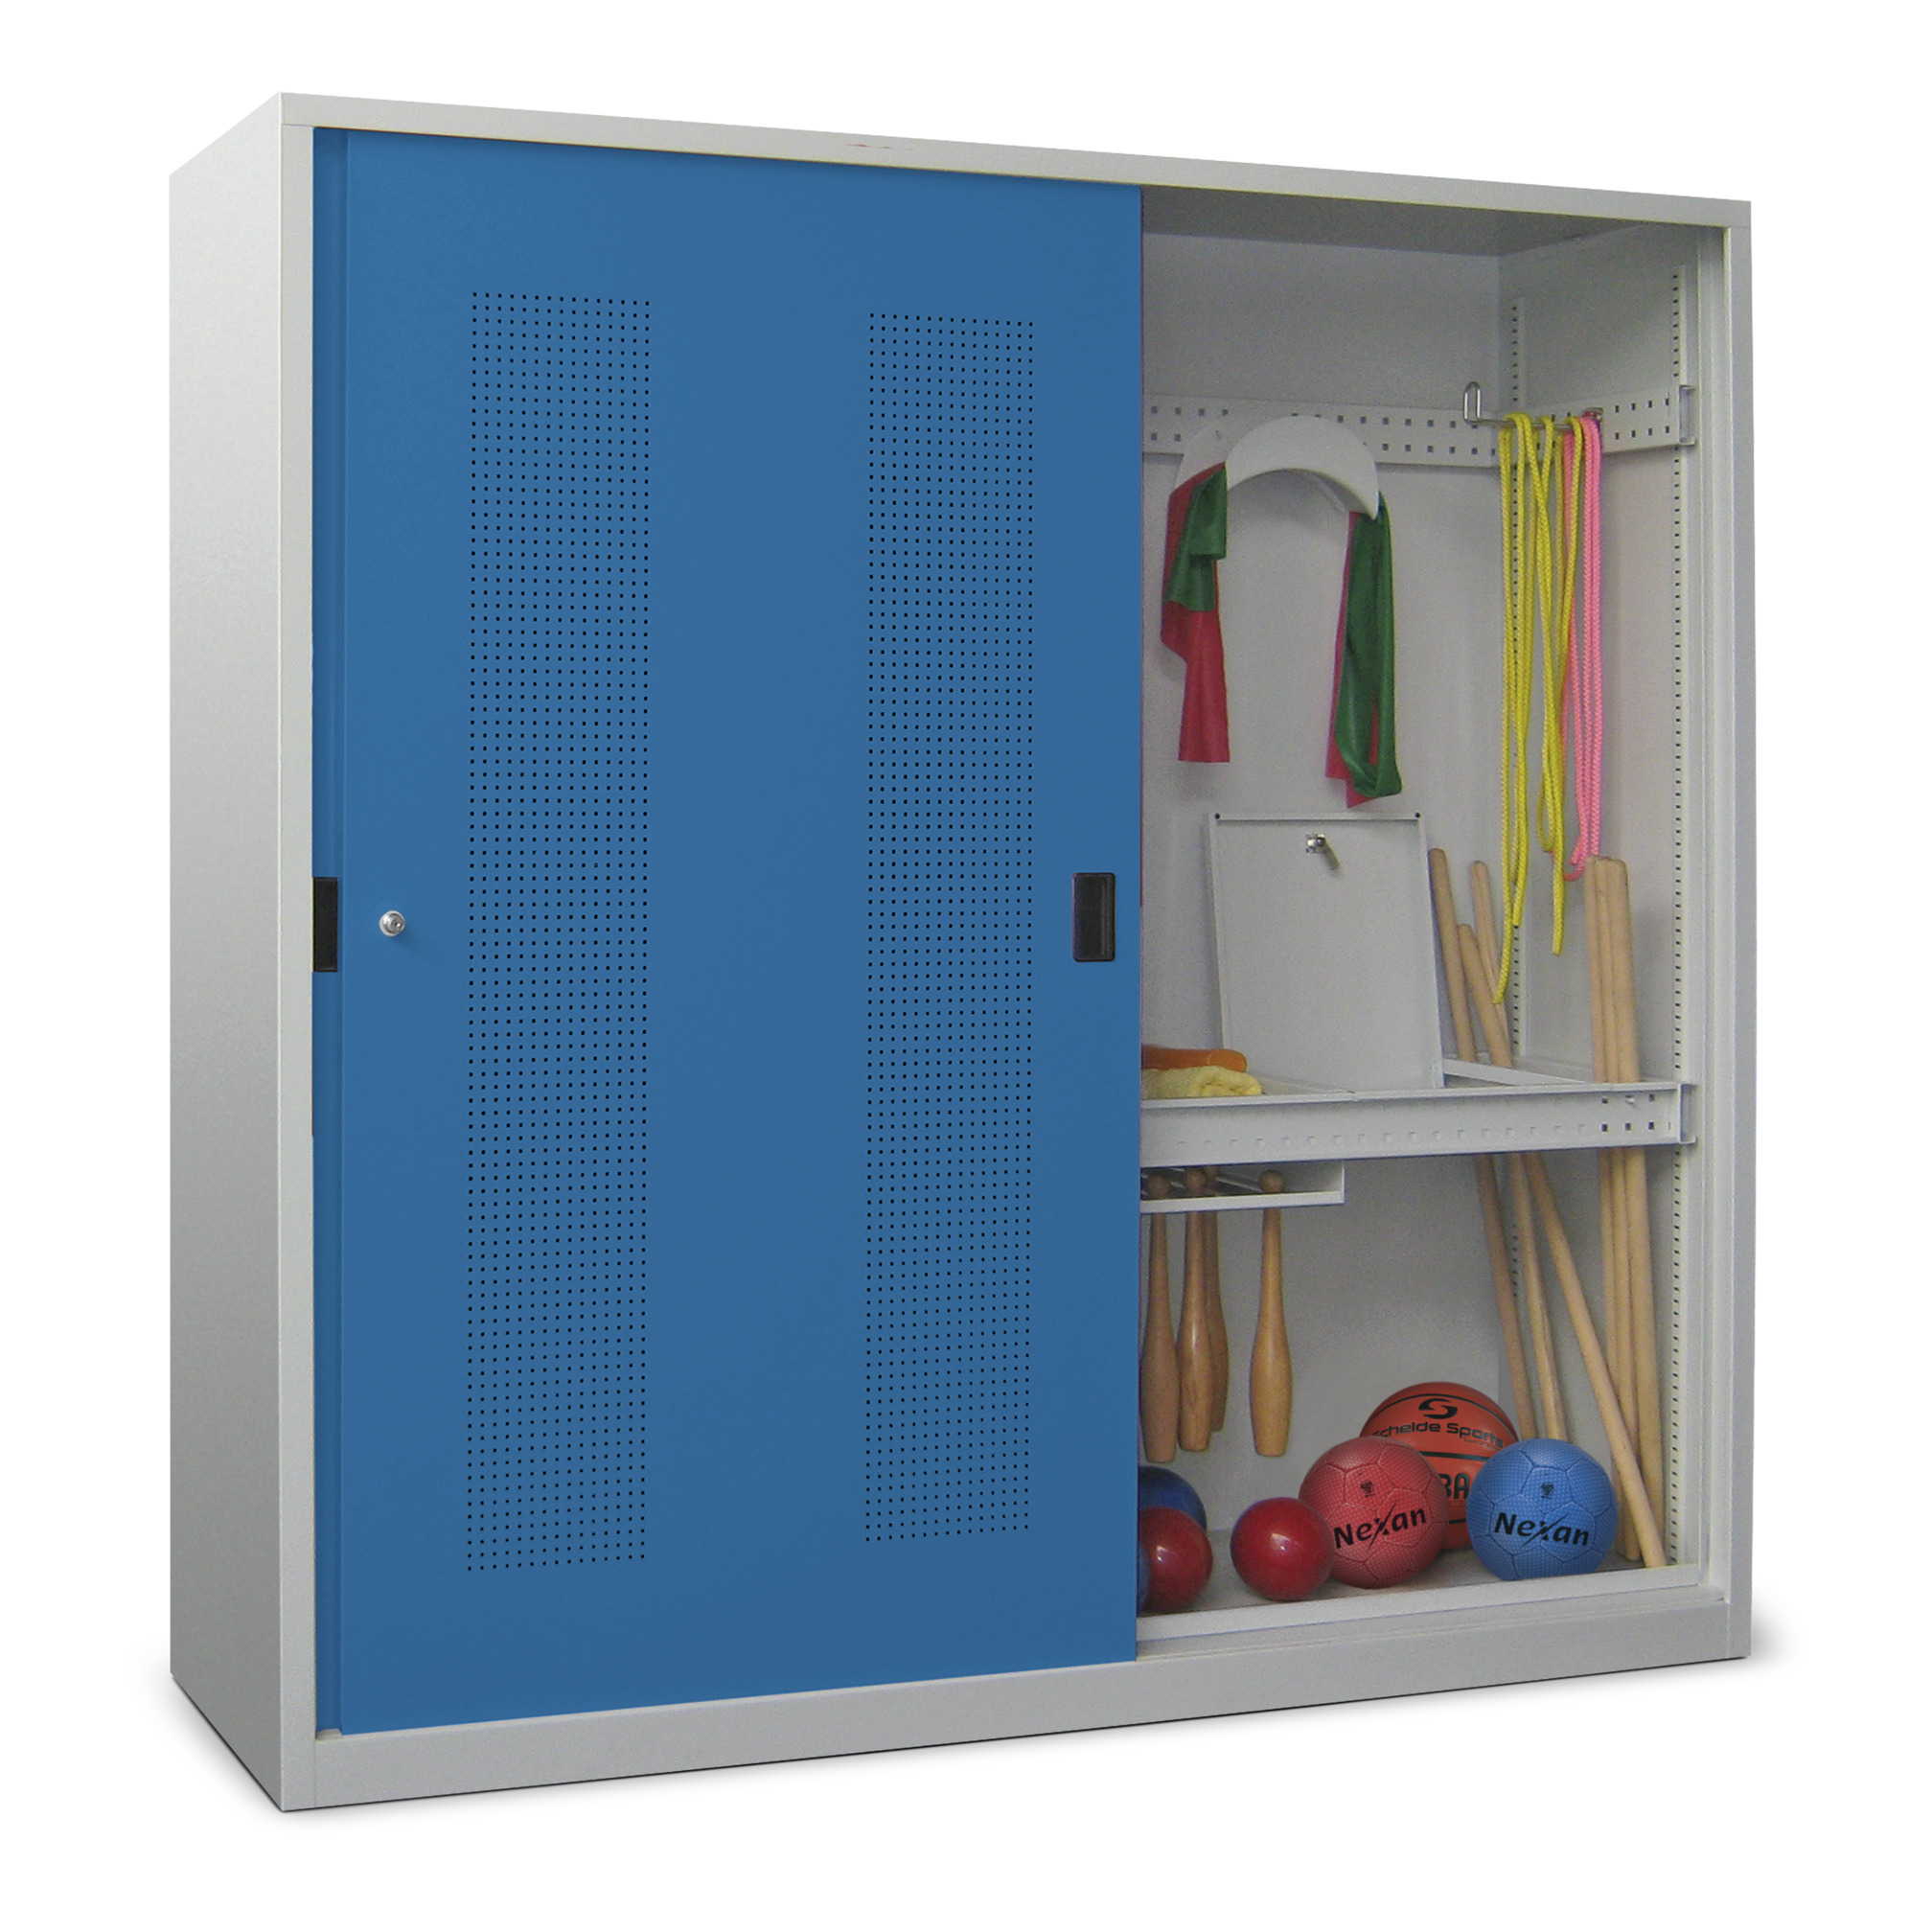 Cabinet type 5 with closed sliding doors